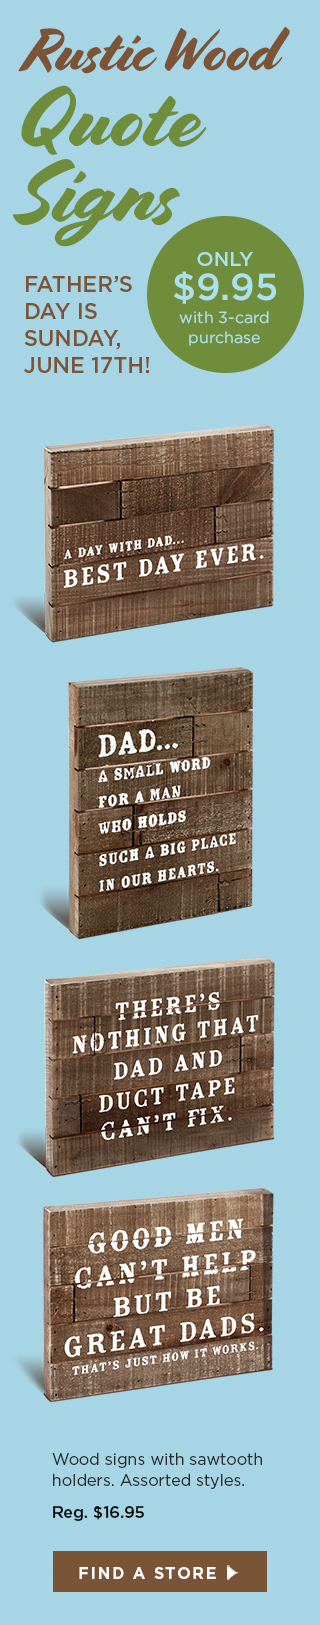 Rustic Wood Quote Signs